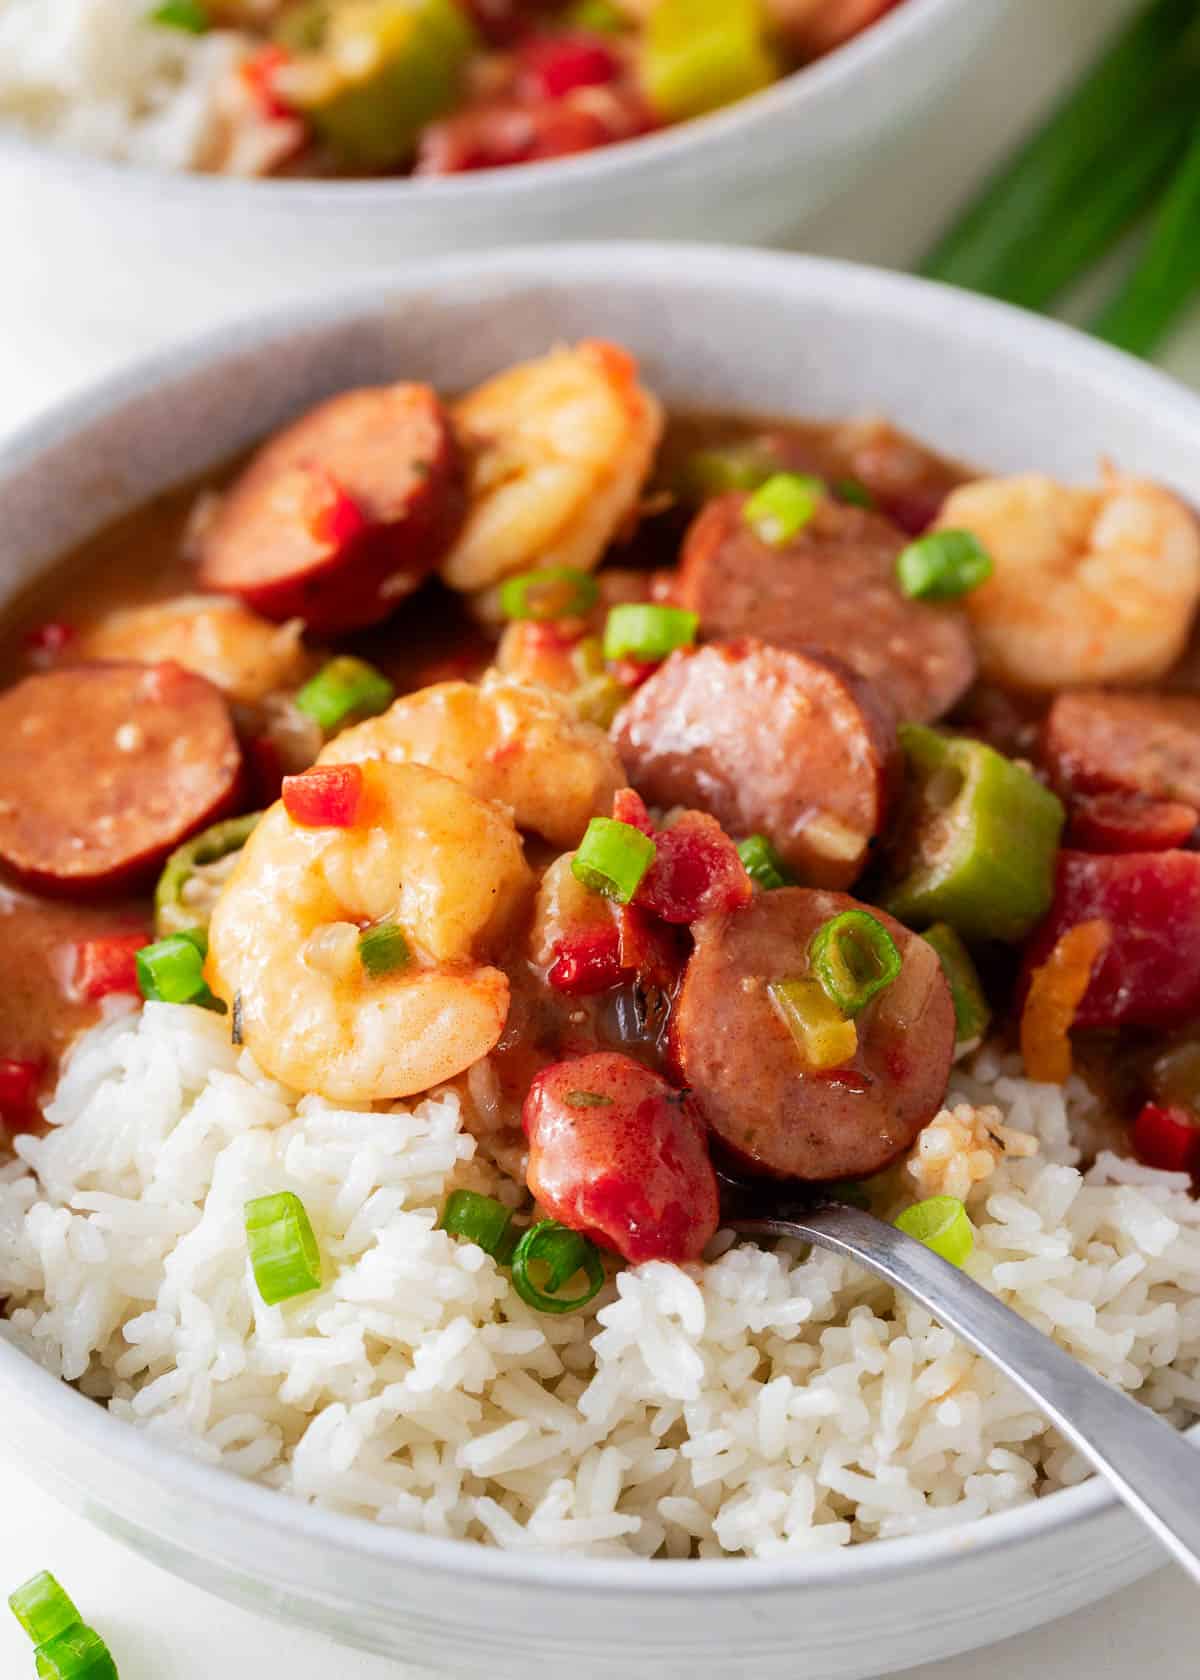 A bowl of New Orleans gumbo with a serving spoon.